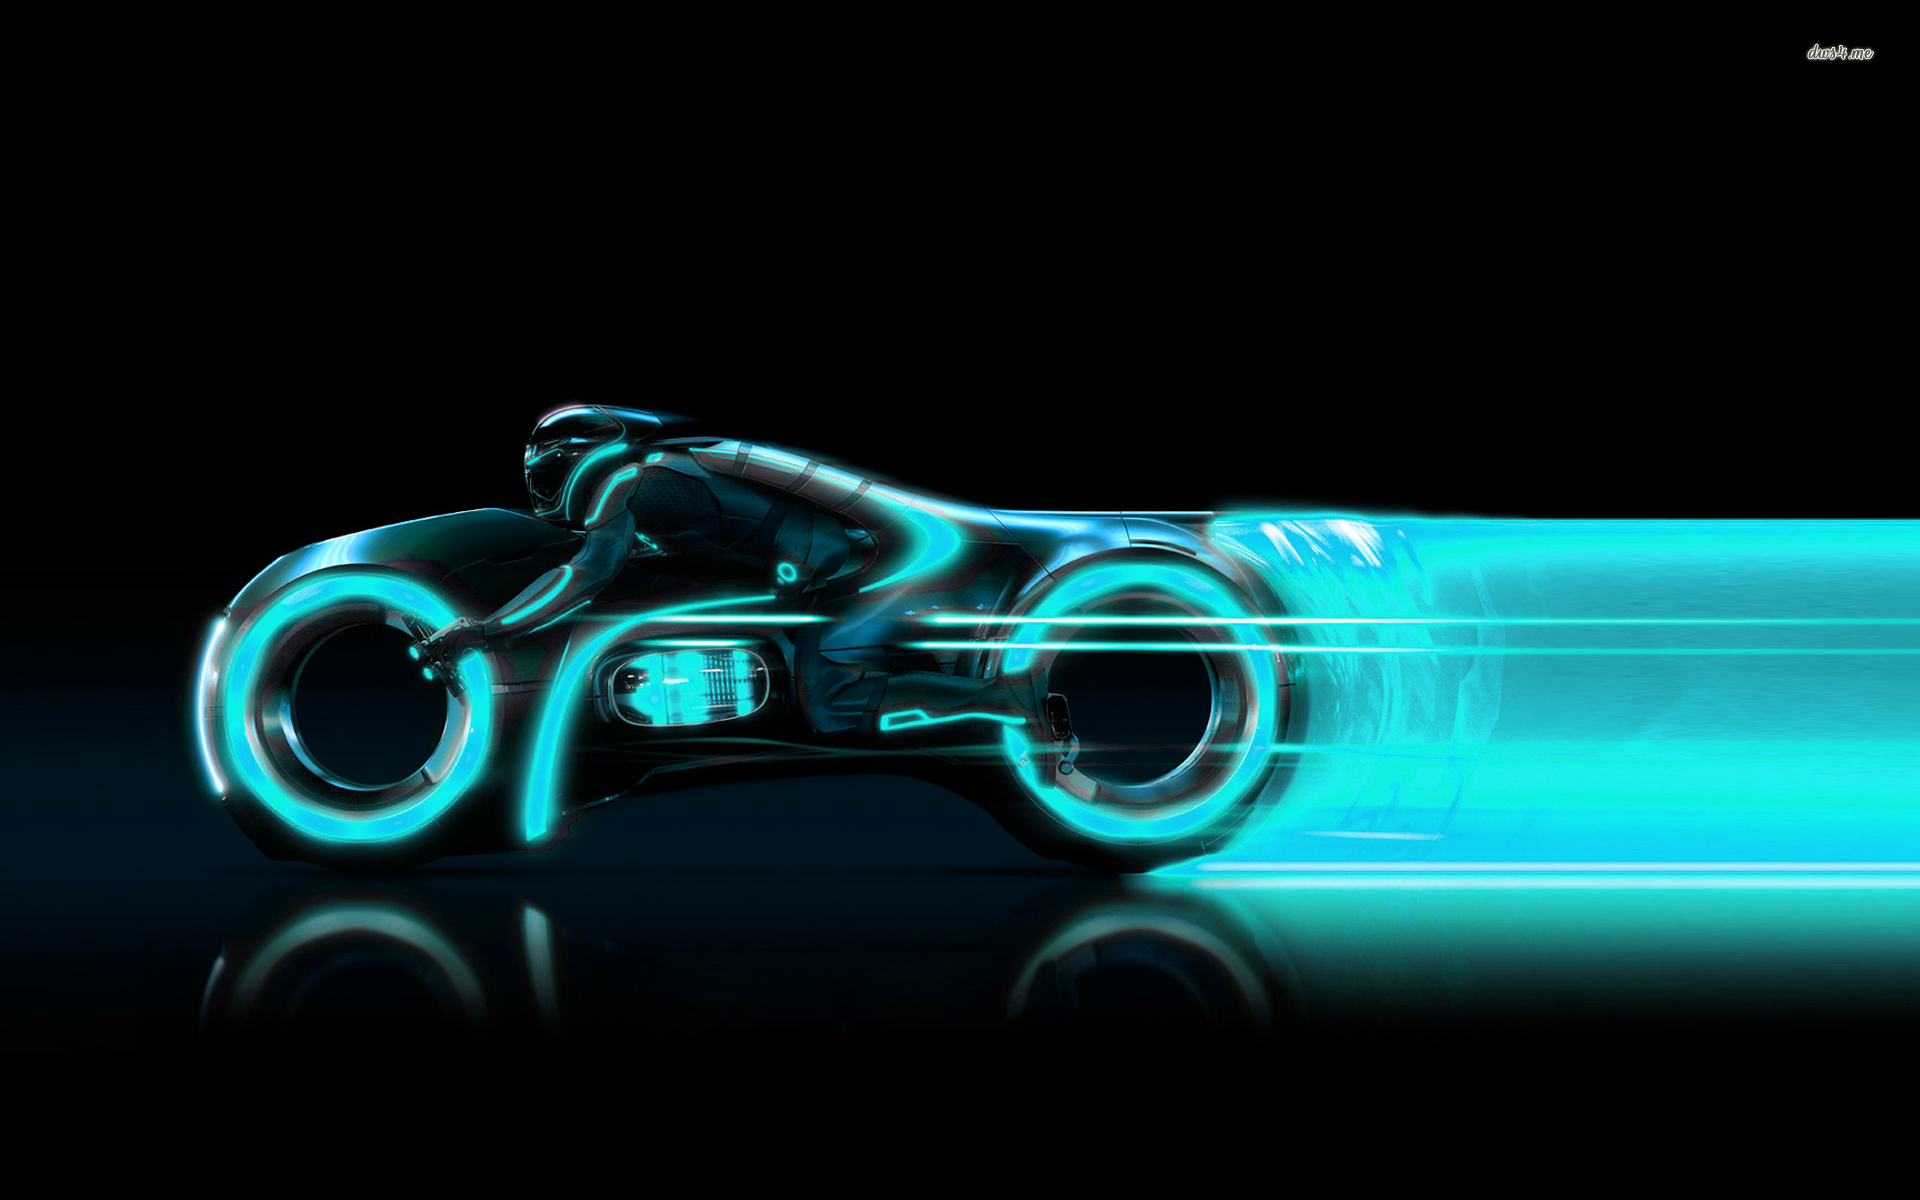 Tron Light Cycle wallpaper - Motorcycle wallpapers - #17305